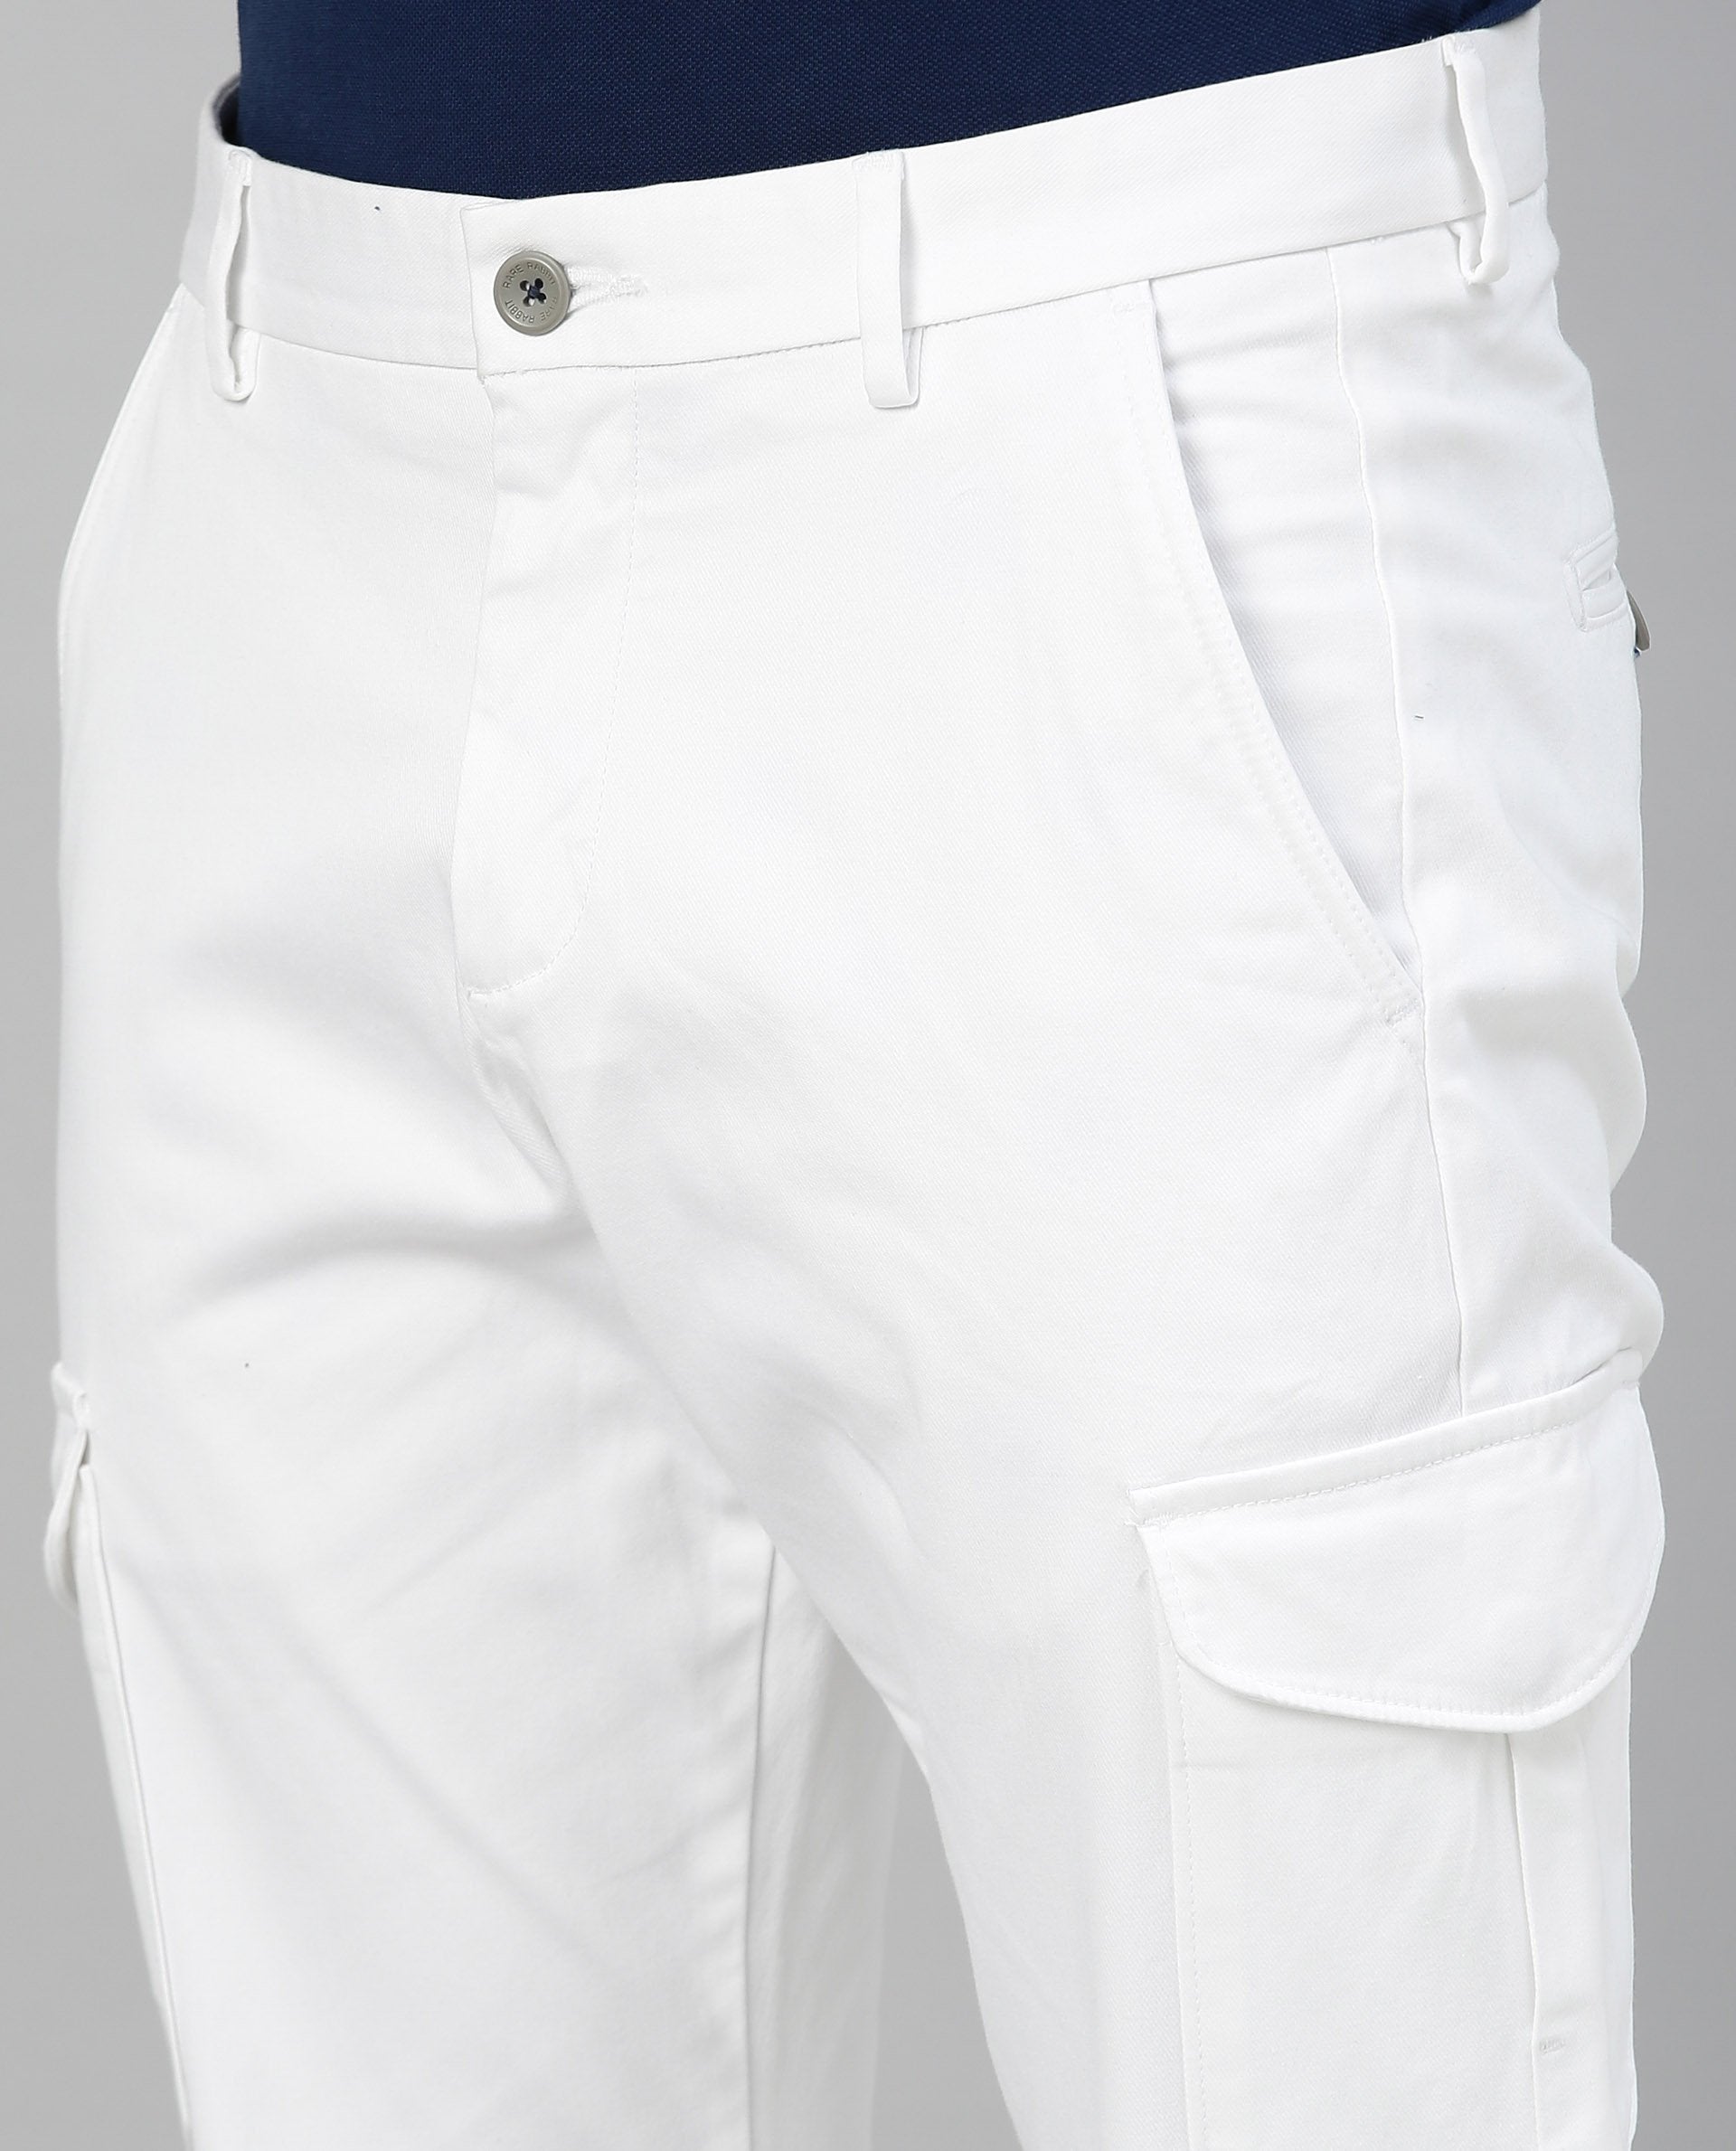 Relaxed Fit Cargo trousers - Cream - Men | H&M GB